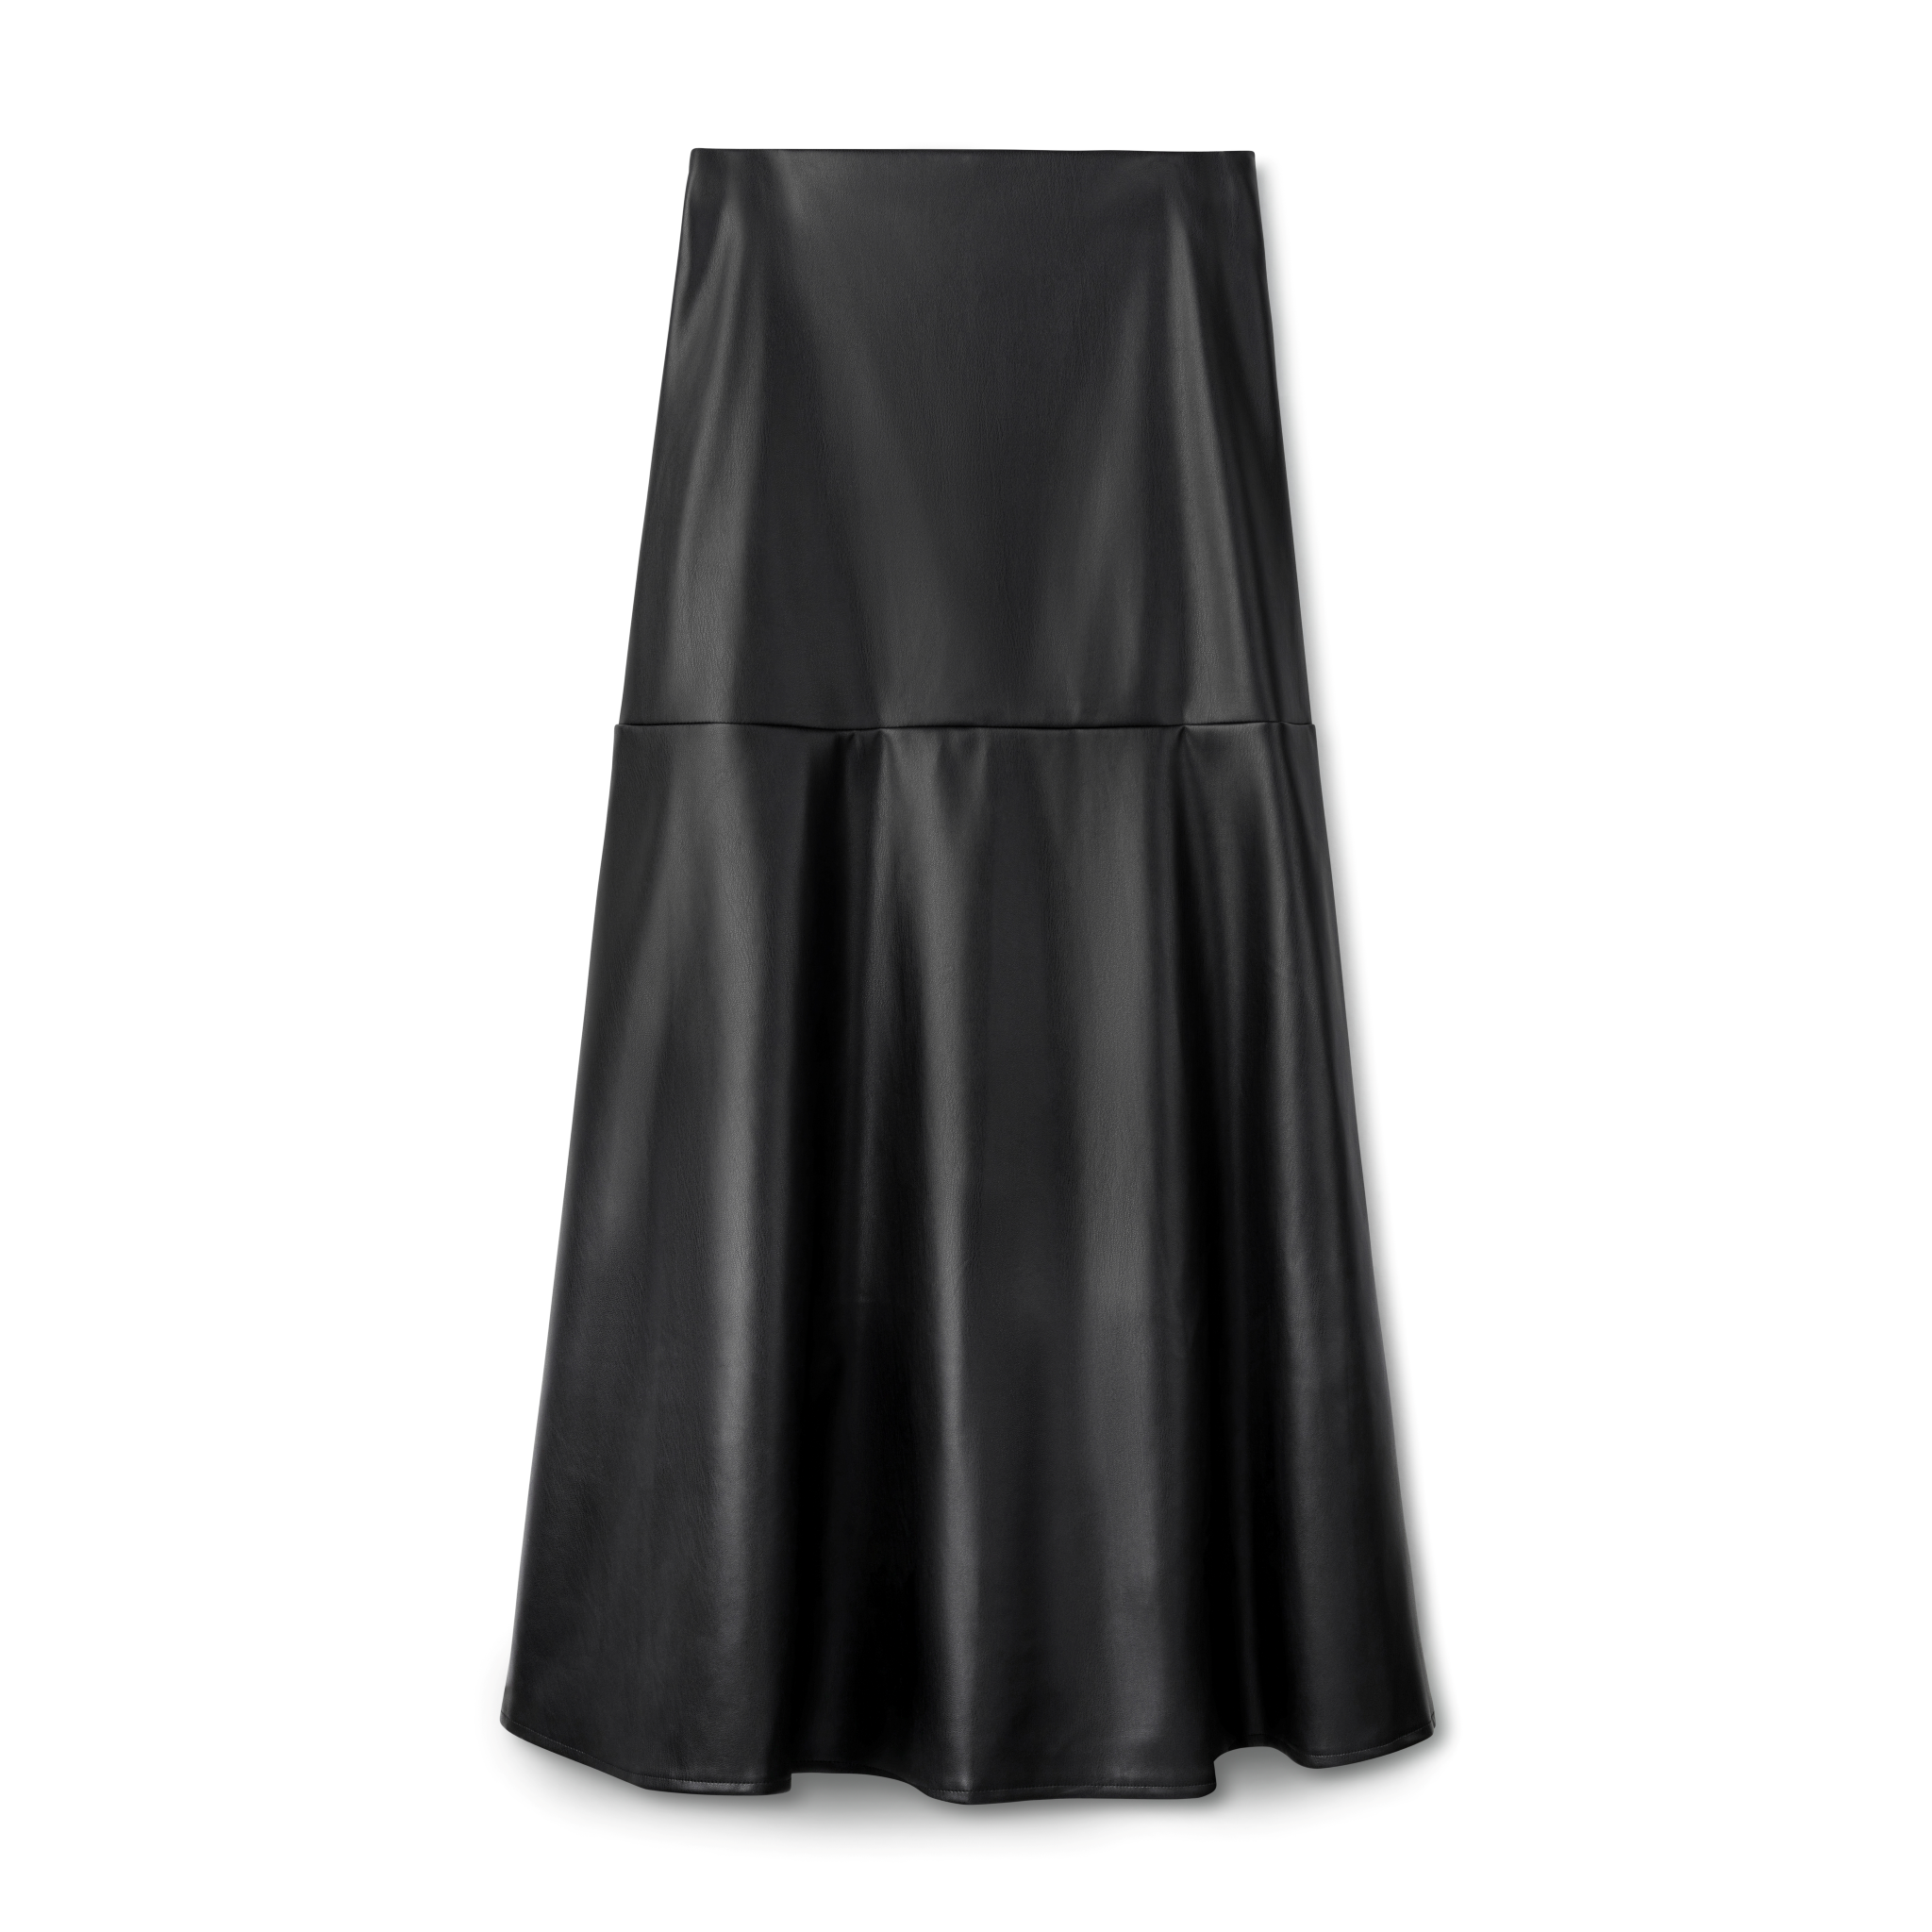 ALL- Skirts – Page 4 – IN:05NY